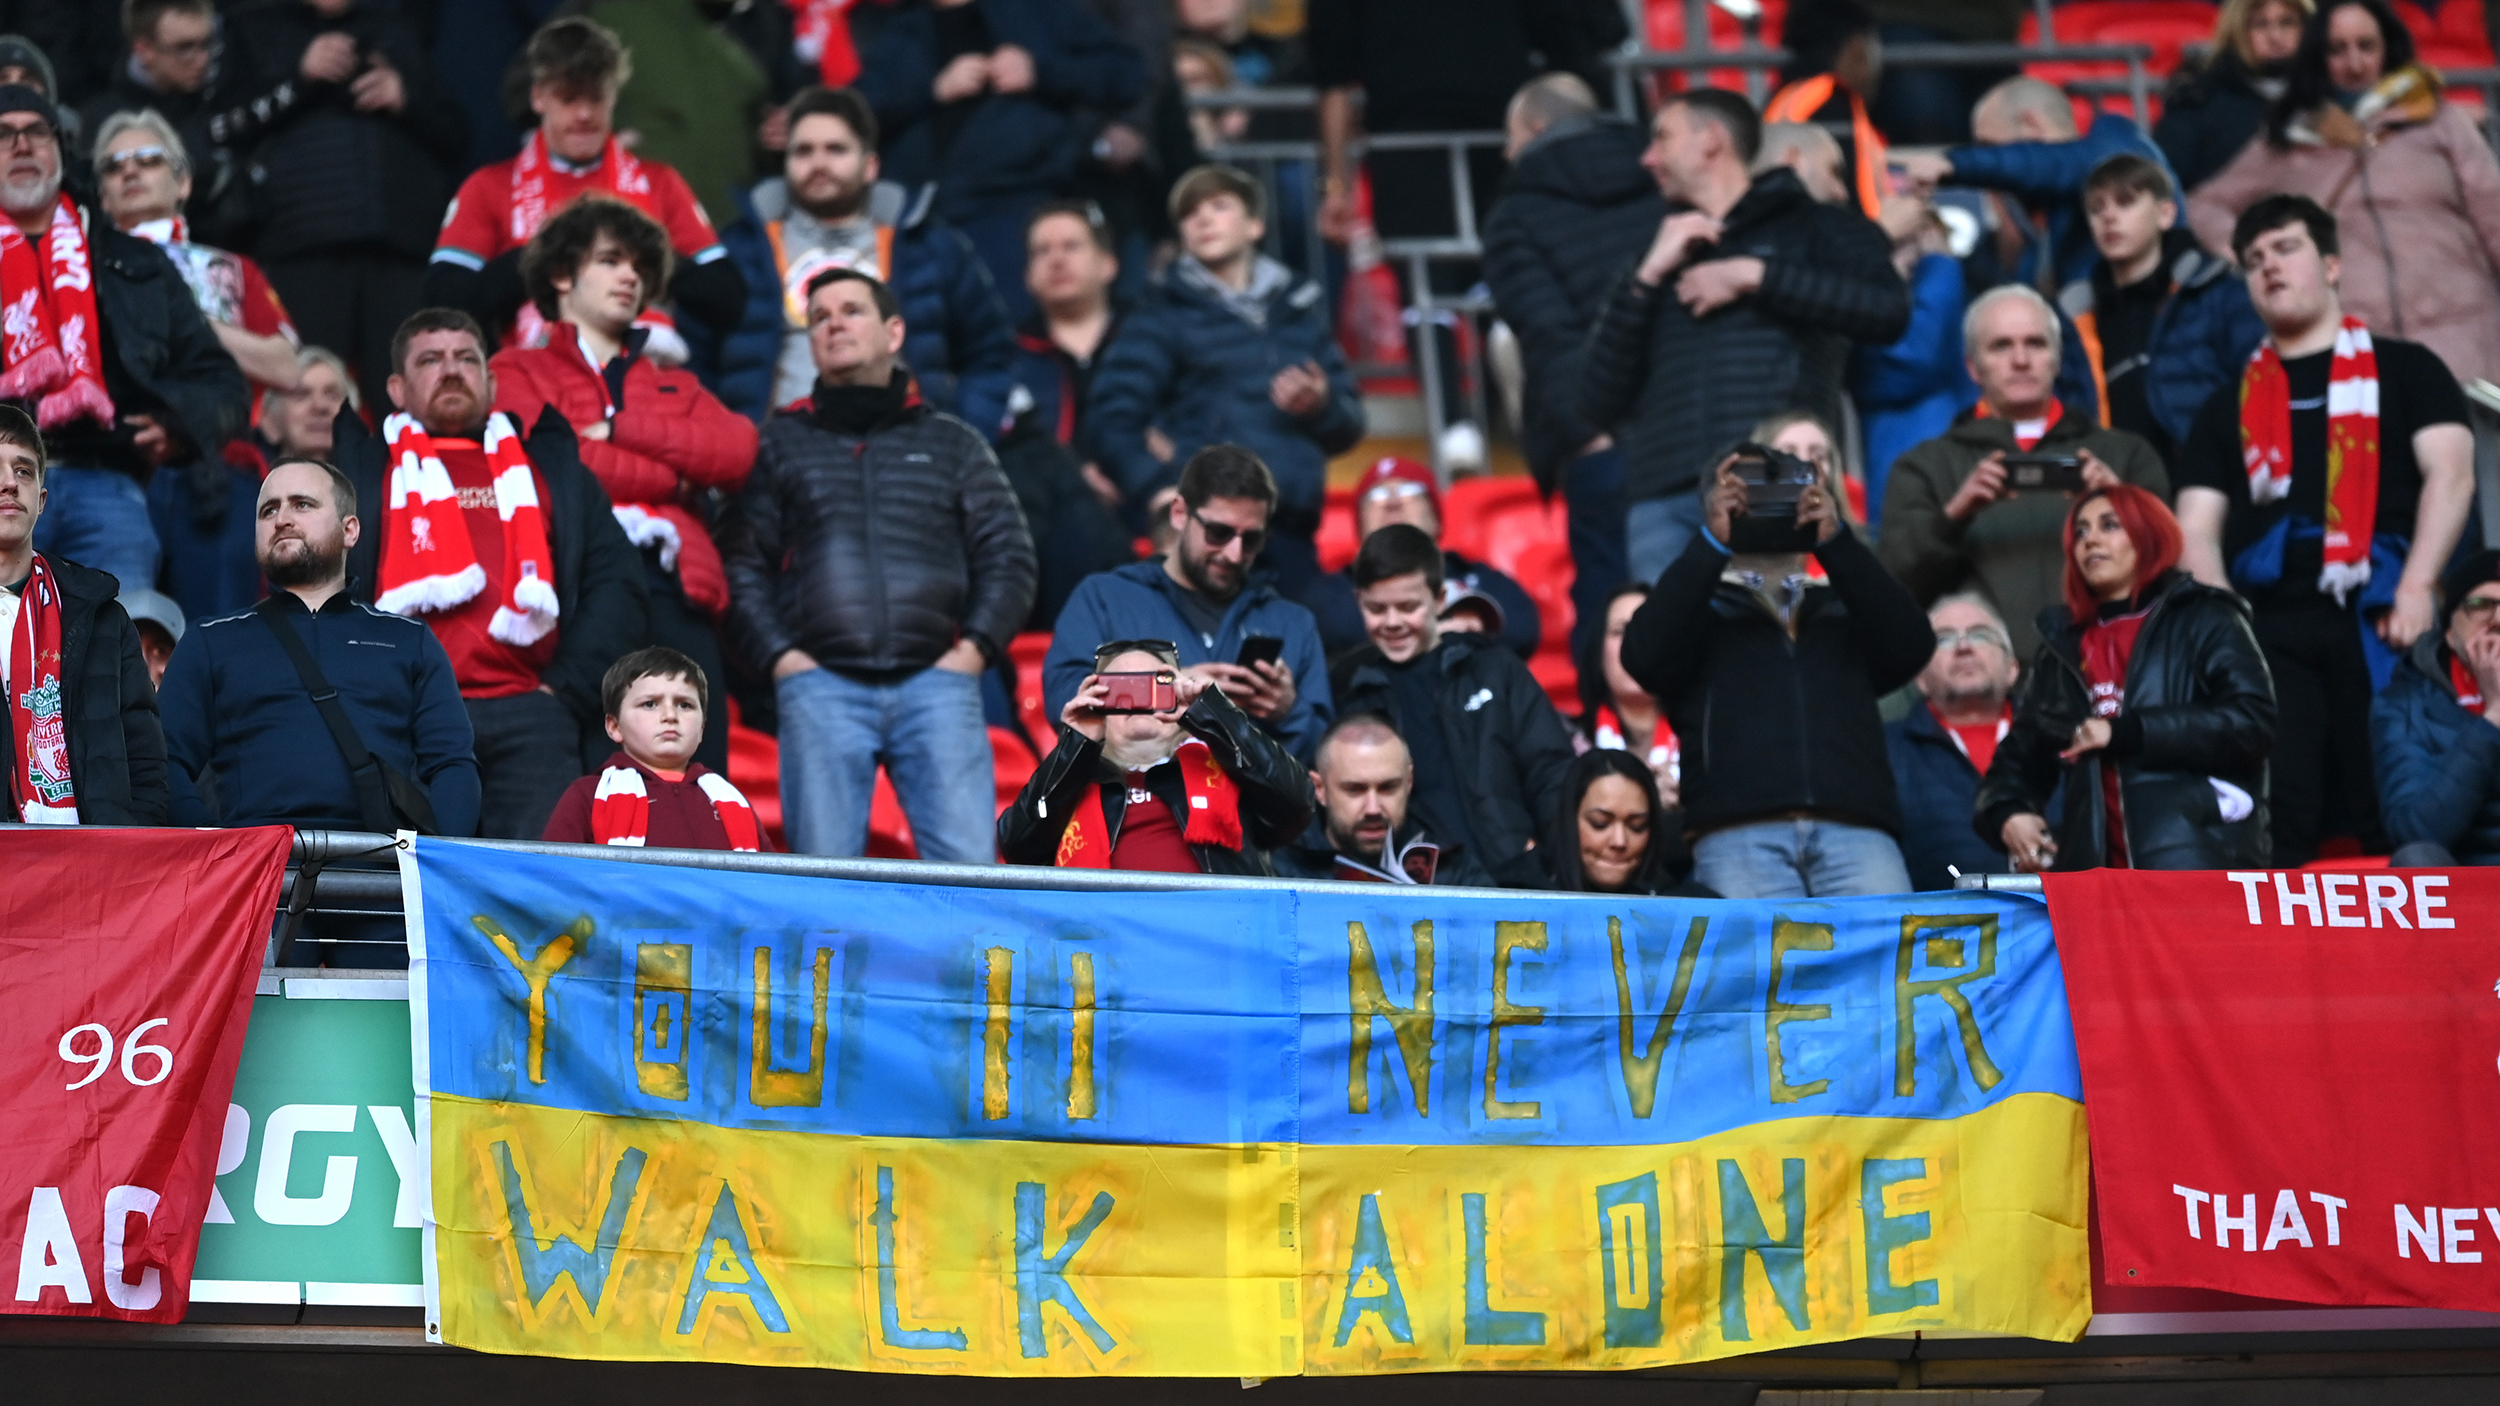 Liverpool fans show a Ukrainian flag to indicate peace and sympathy with Ukraine prior to the Carabao Cup Final match between Chelsea and Liverpool at Wembley Stadium on February 27, 2022 in London, England